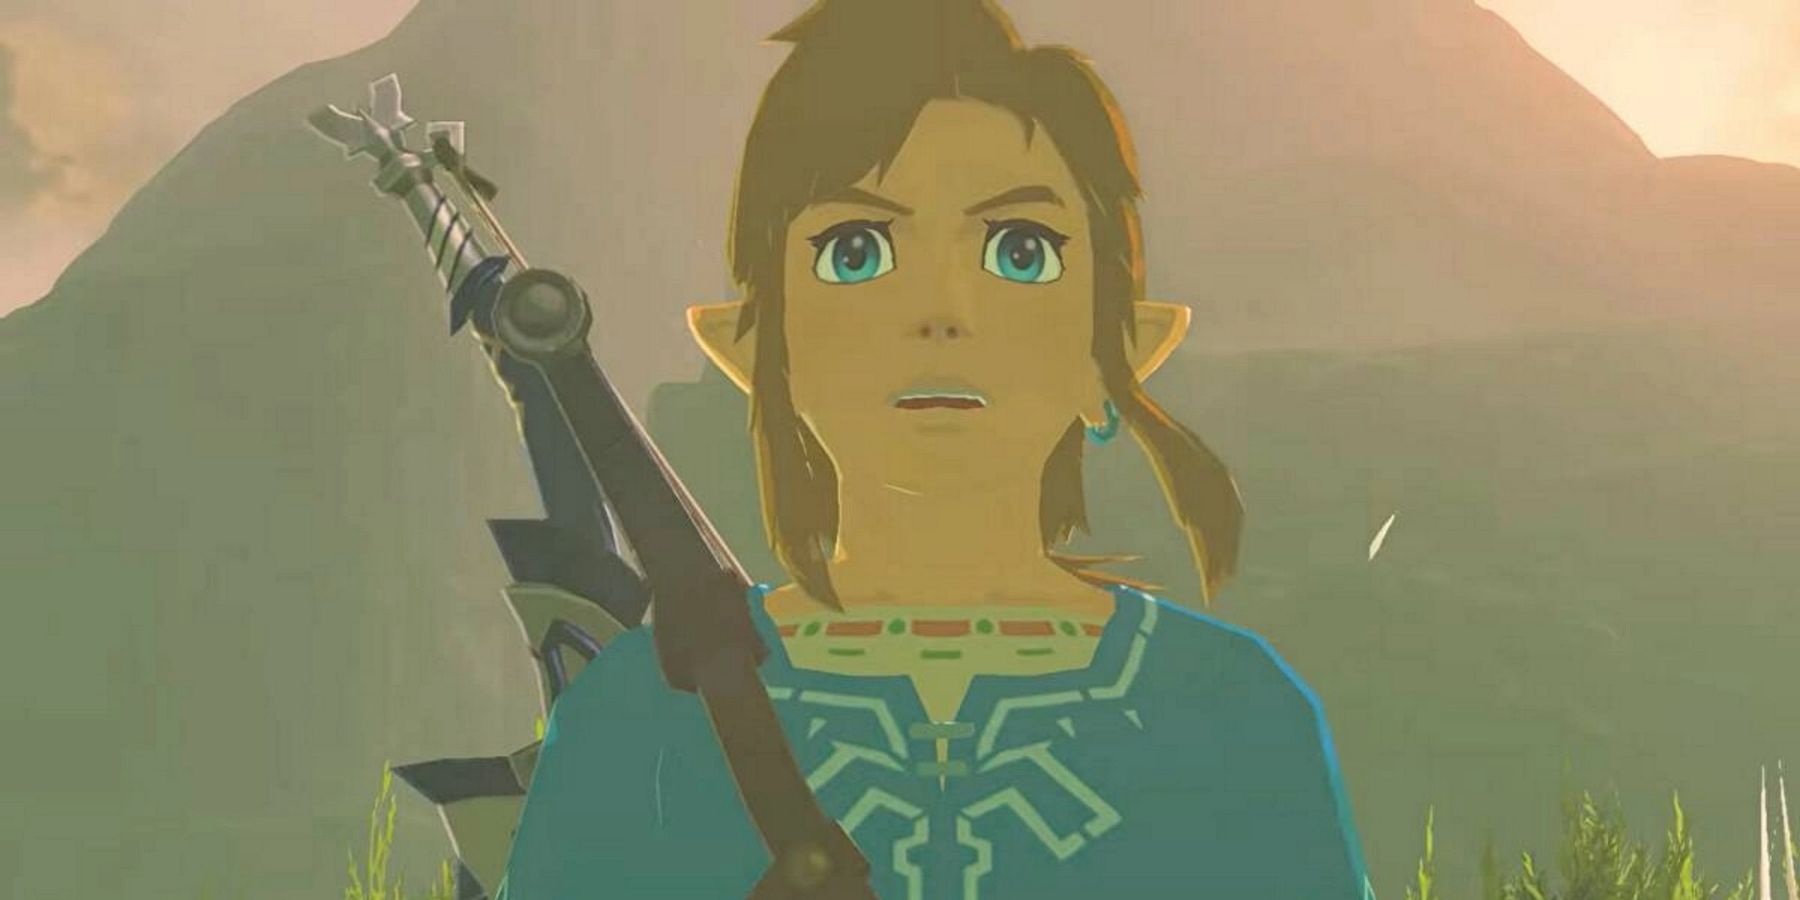 Did You Know Gaming Heroes Of Hyrule Video Pulled After Nintendo Issues